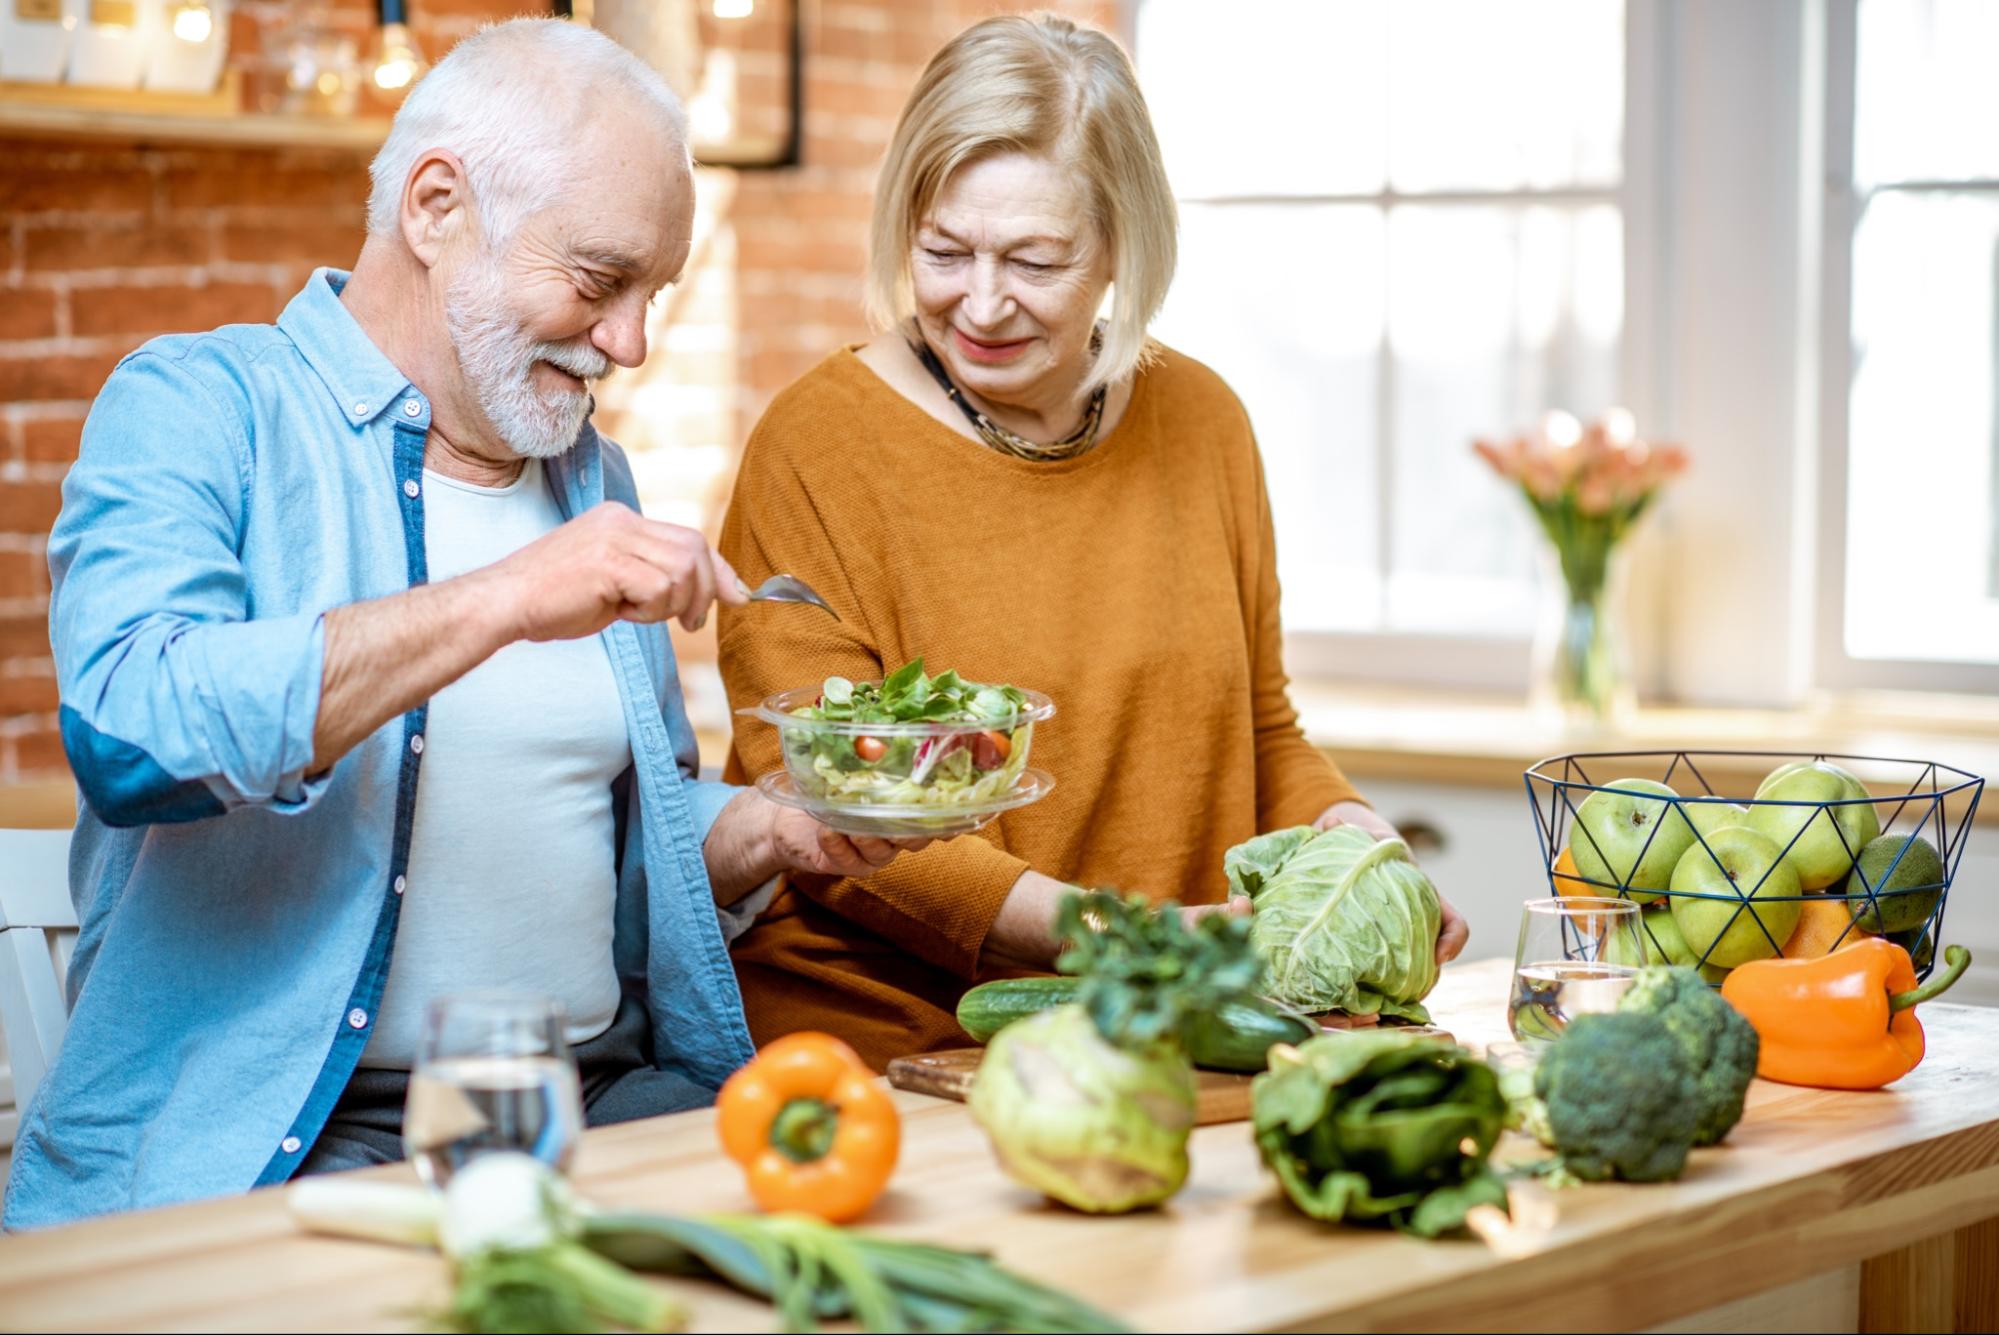 Does a healthy diet reduce the risk of hearing loss?